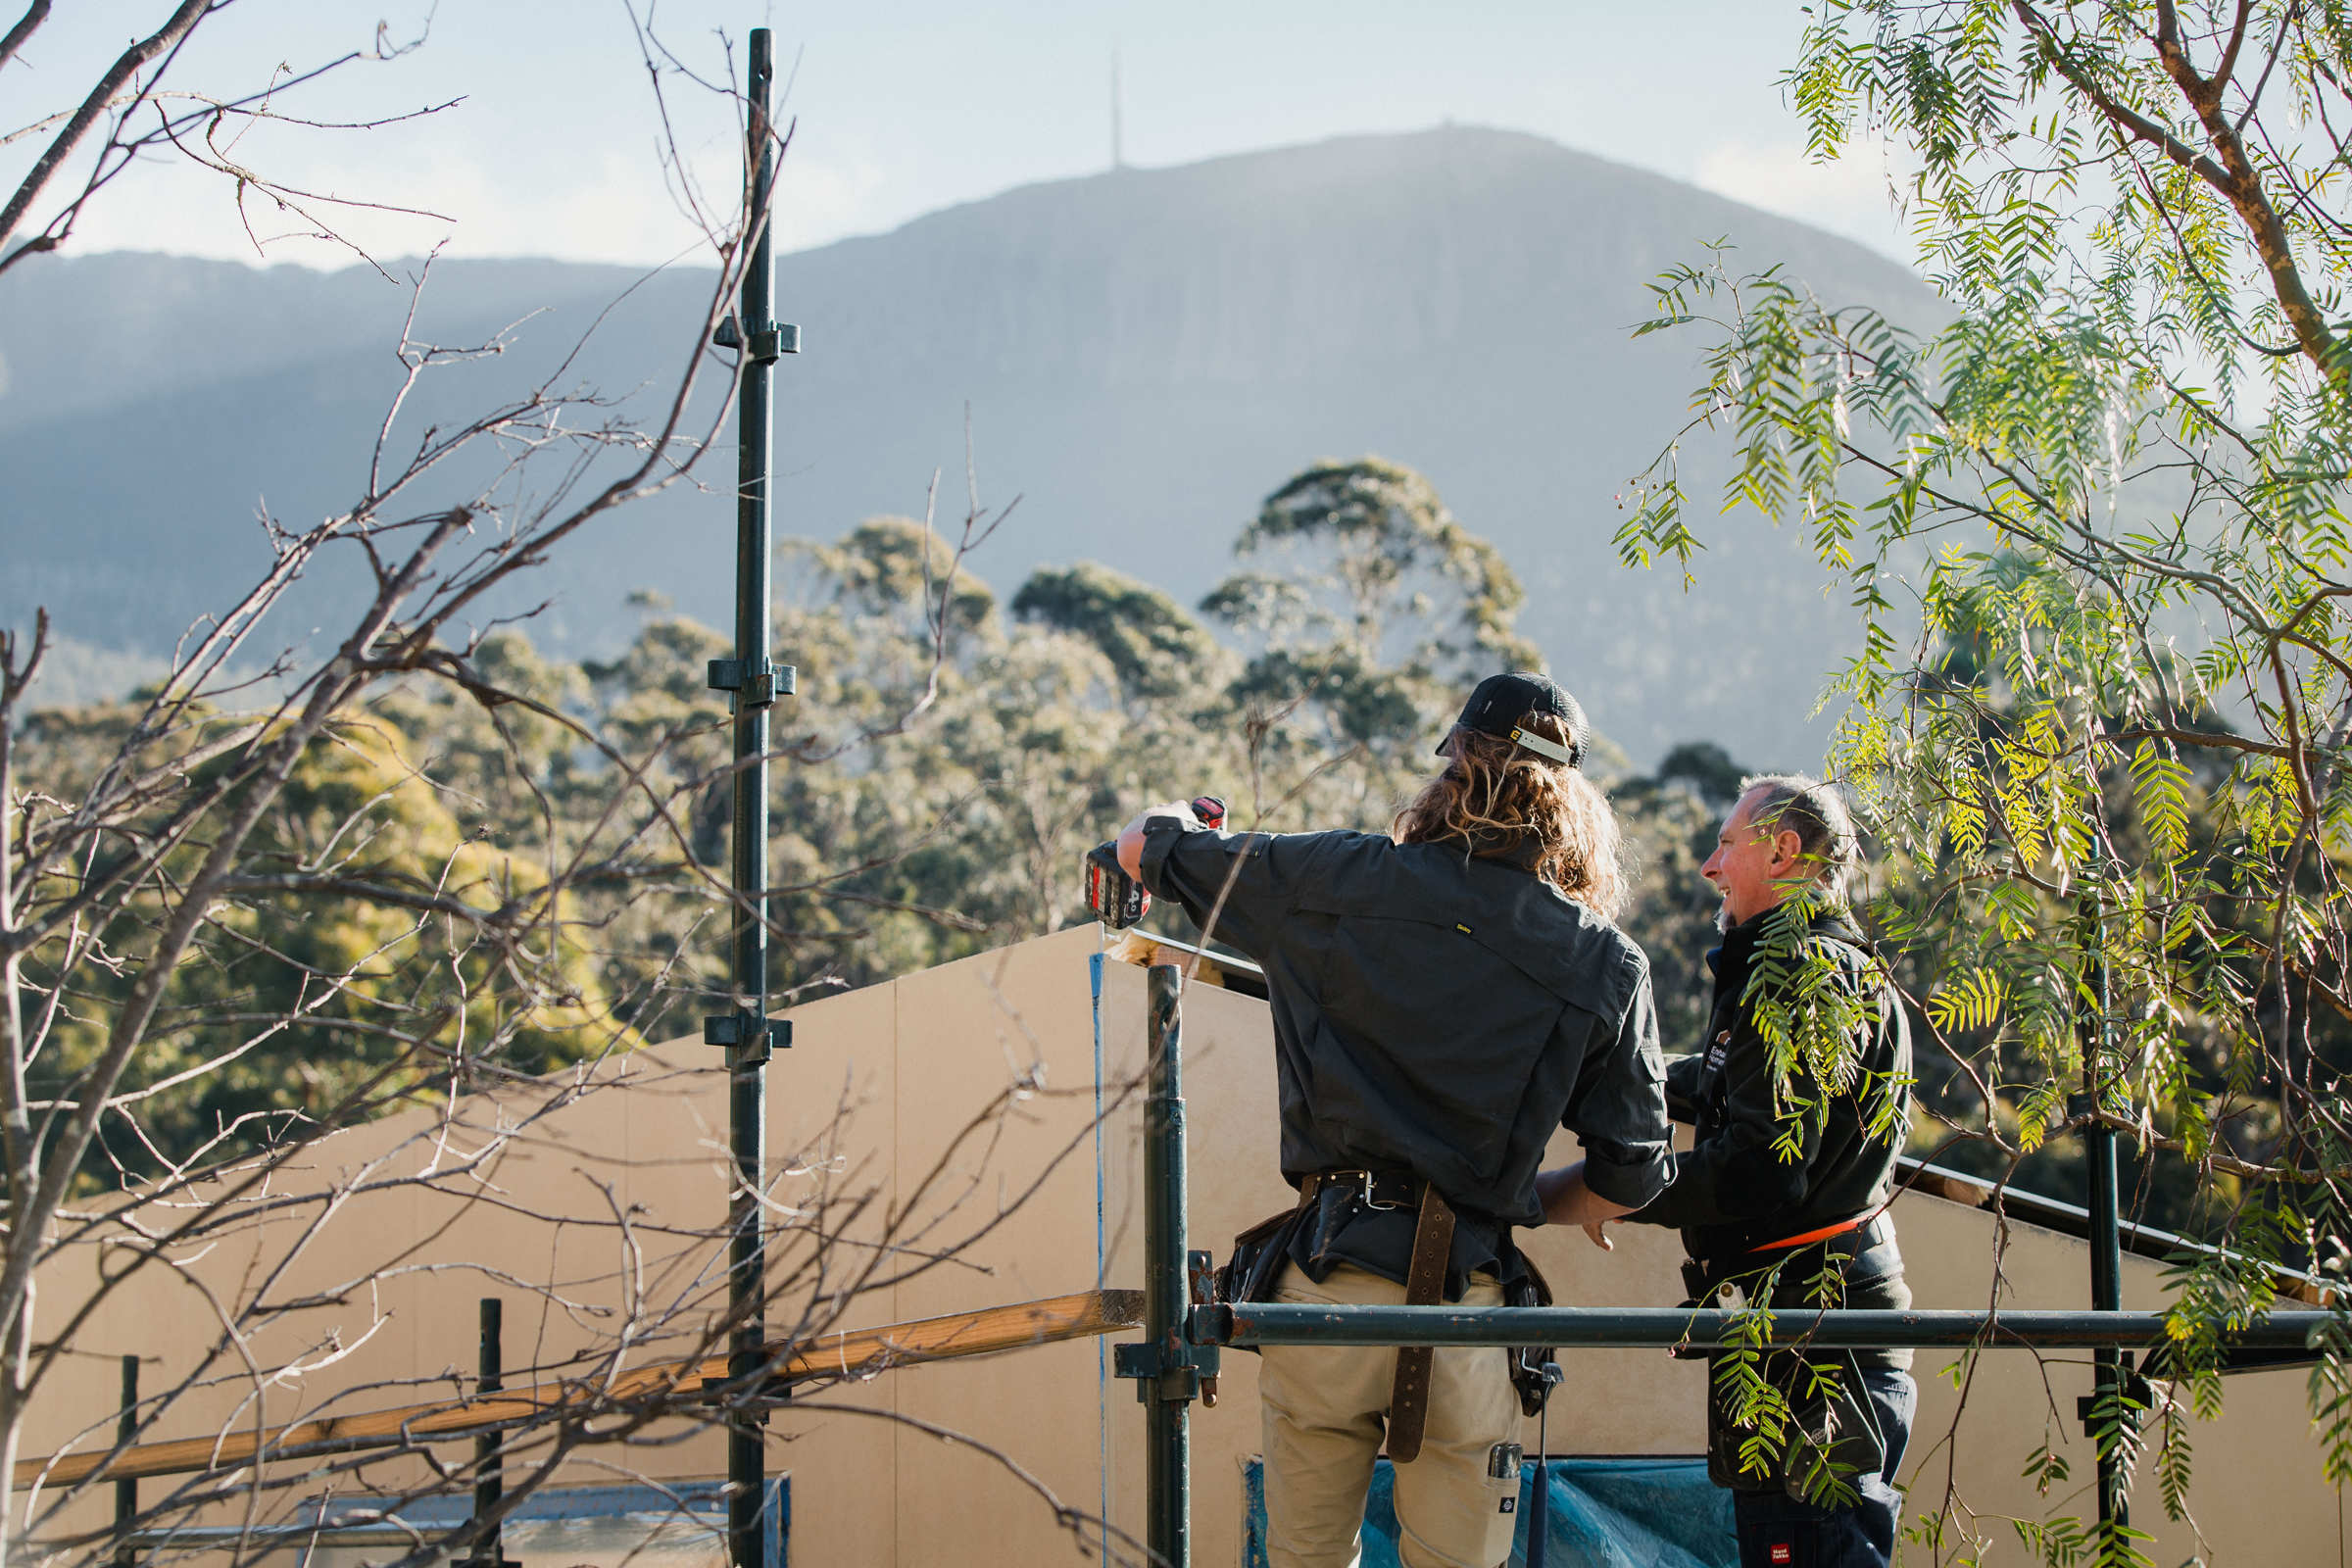 Experienced builder supporting and guiding the next generation of apprentices, with Hobart’s kunanyi / Mount Wellington in the background. Photo: Jordan Davis.